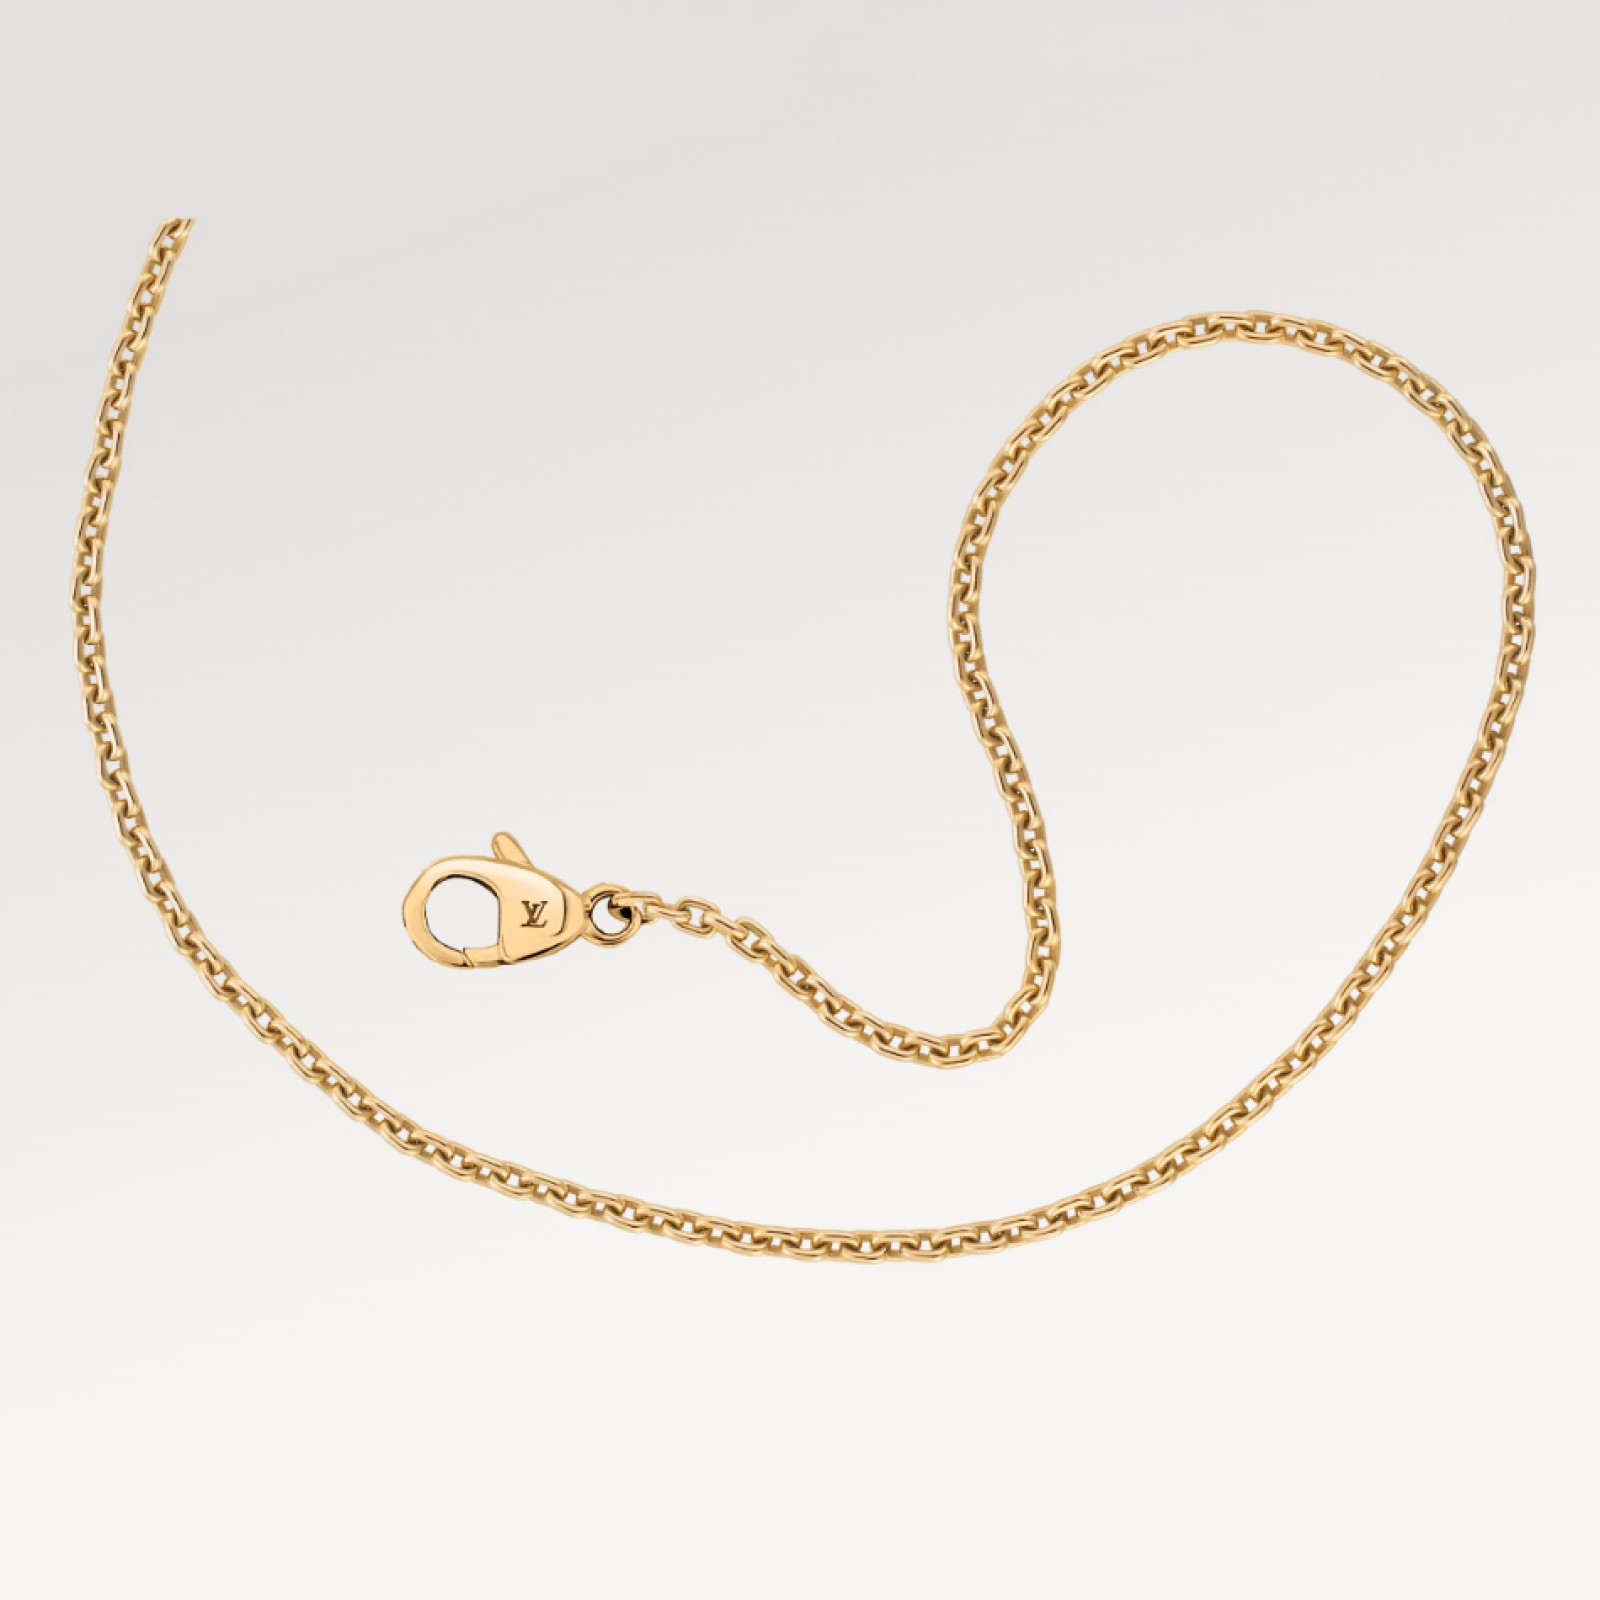 Chain in yellow gold